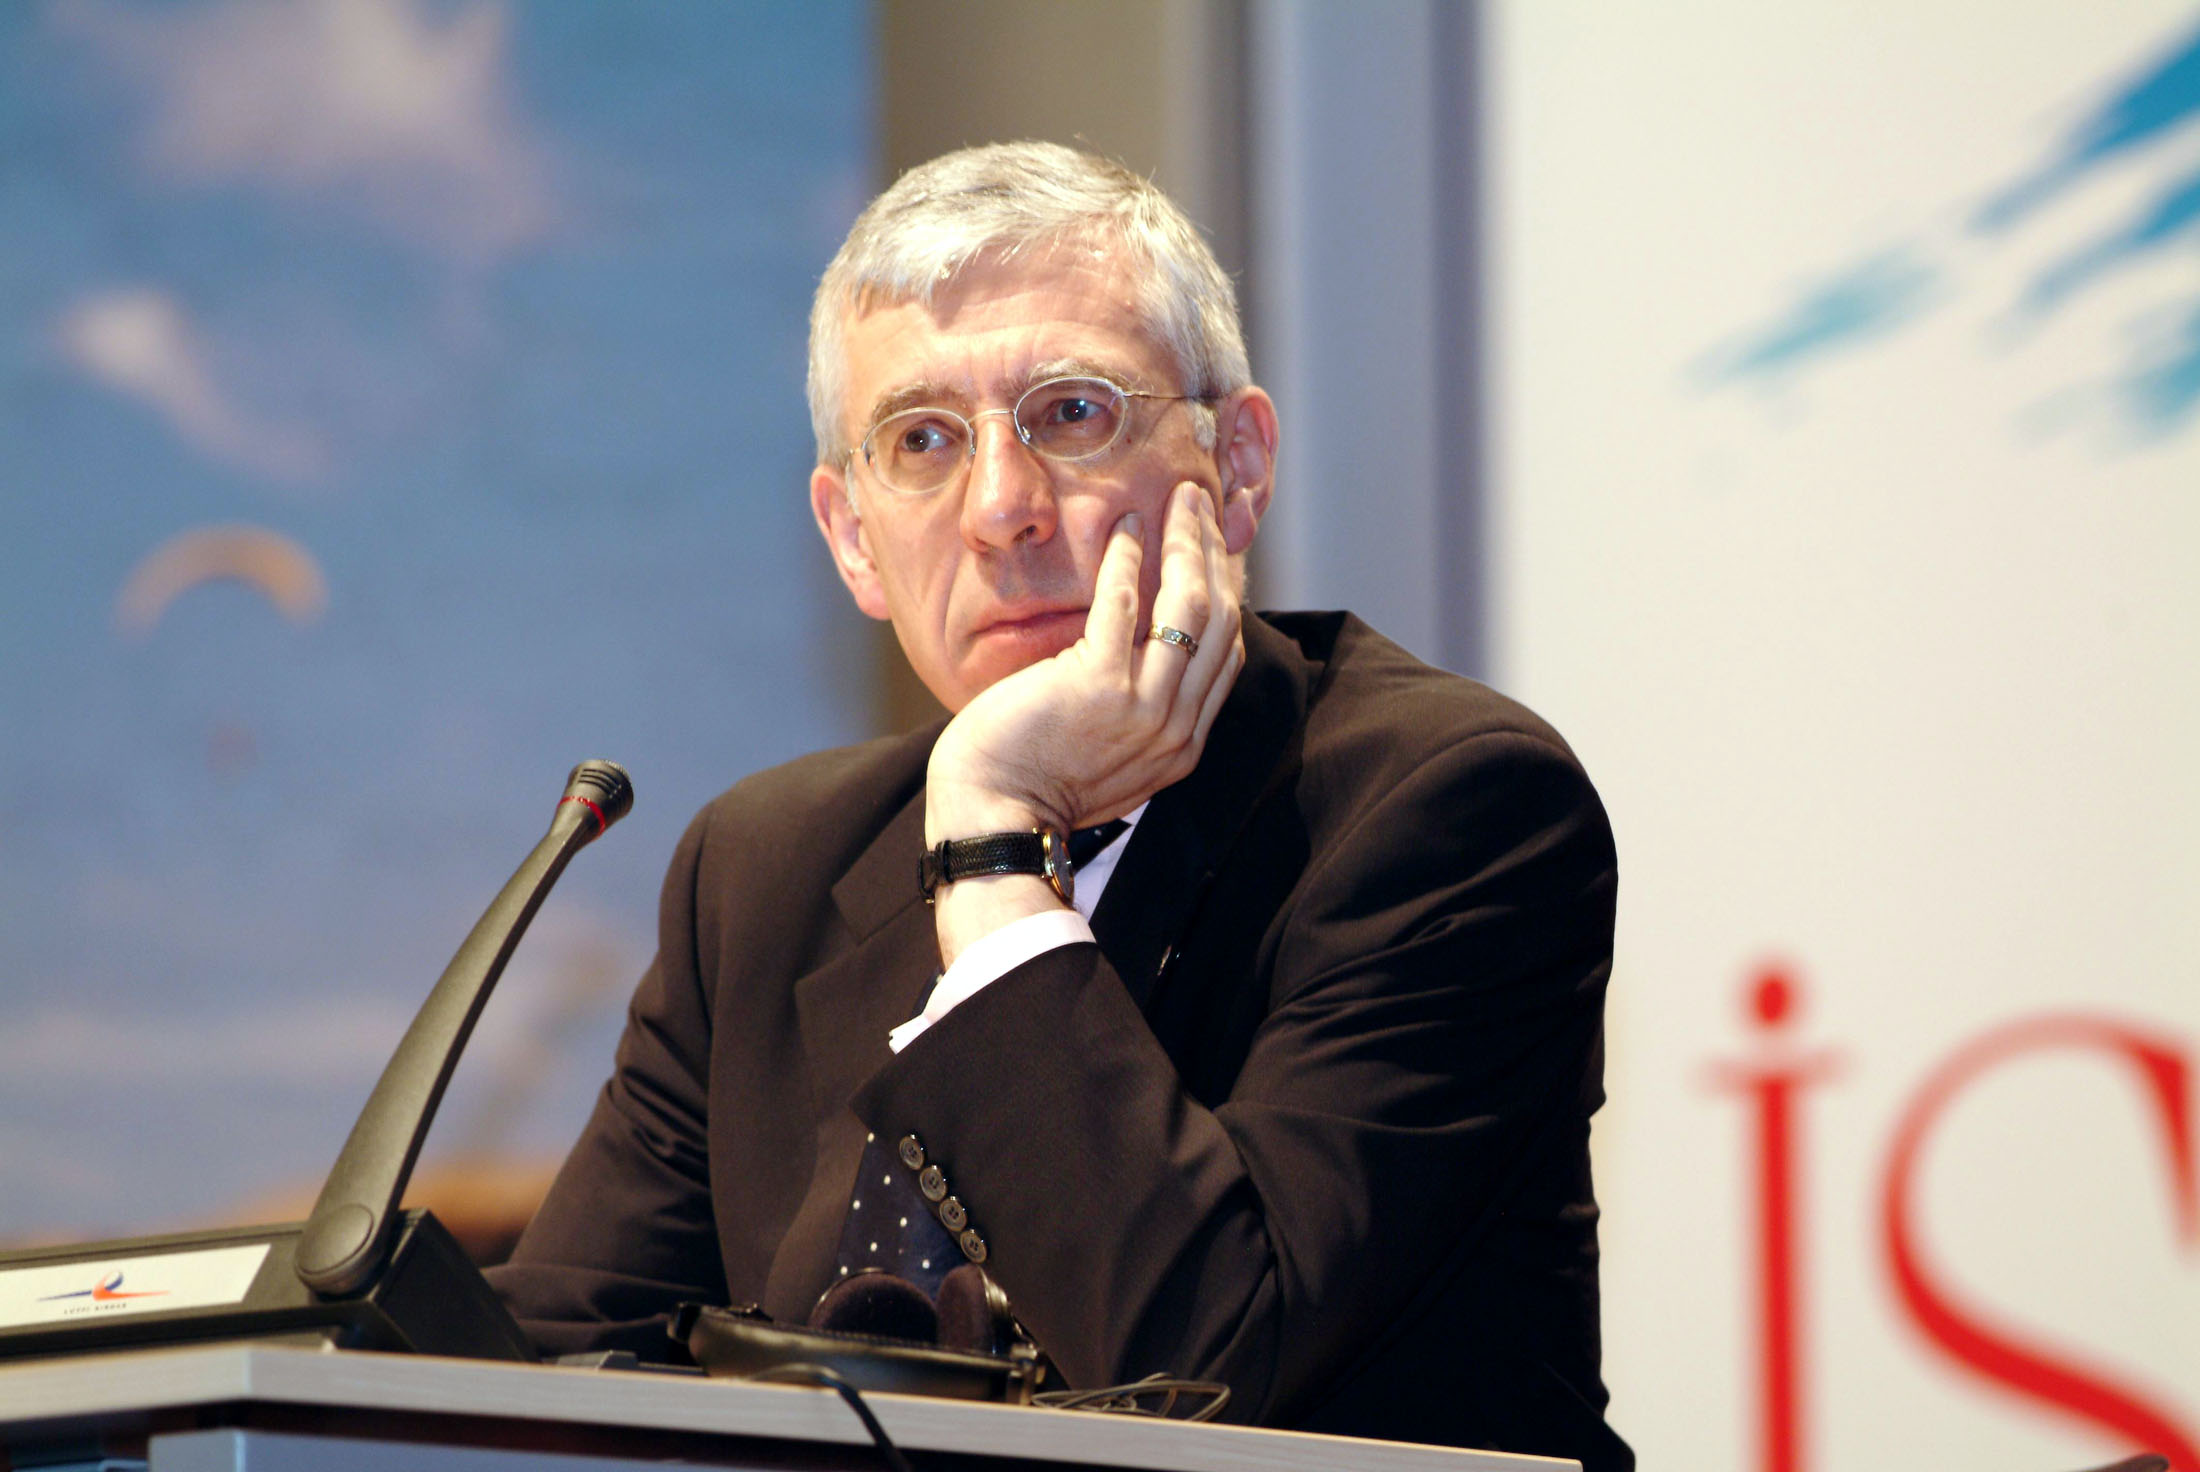 My exclusive interview with Rt. Hon. Jack Straw - Website of.